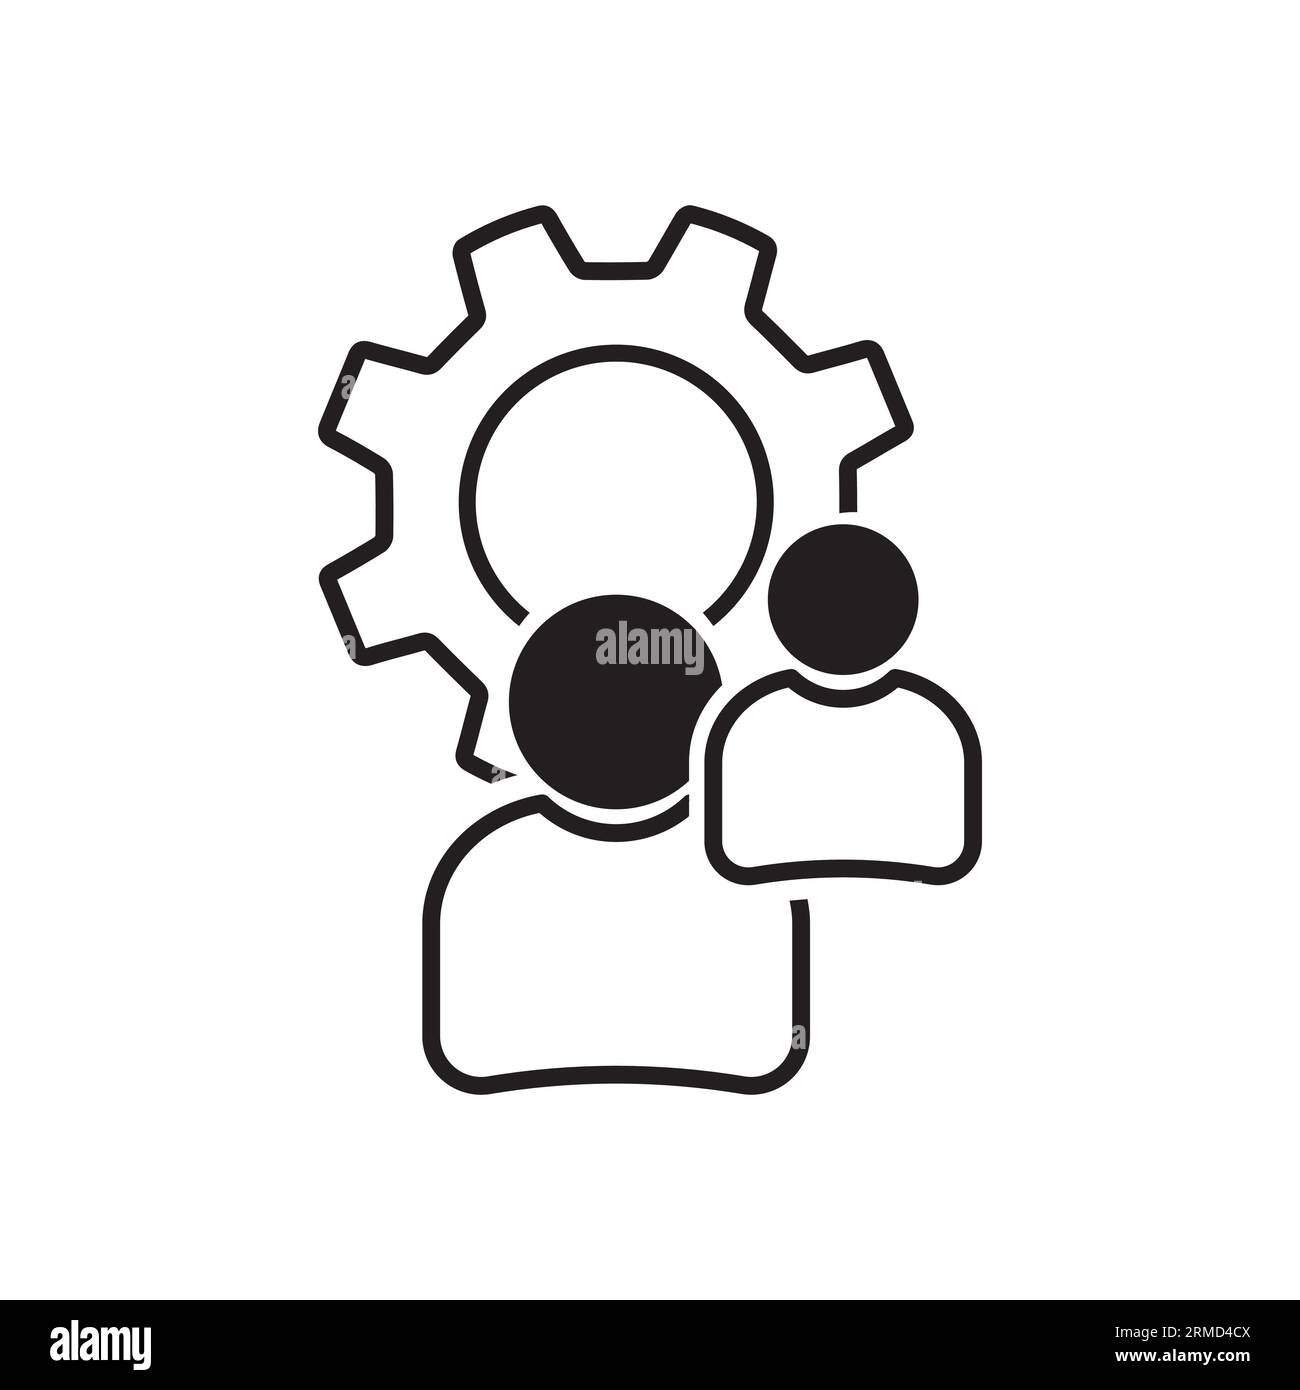 Team work icon, vector pictogram of collaboration process. People in cog wheel, efficiency stroke sign for HRM management. Stock Vector